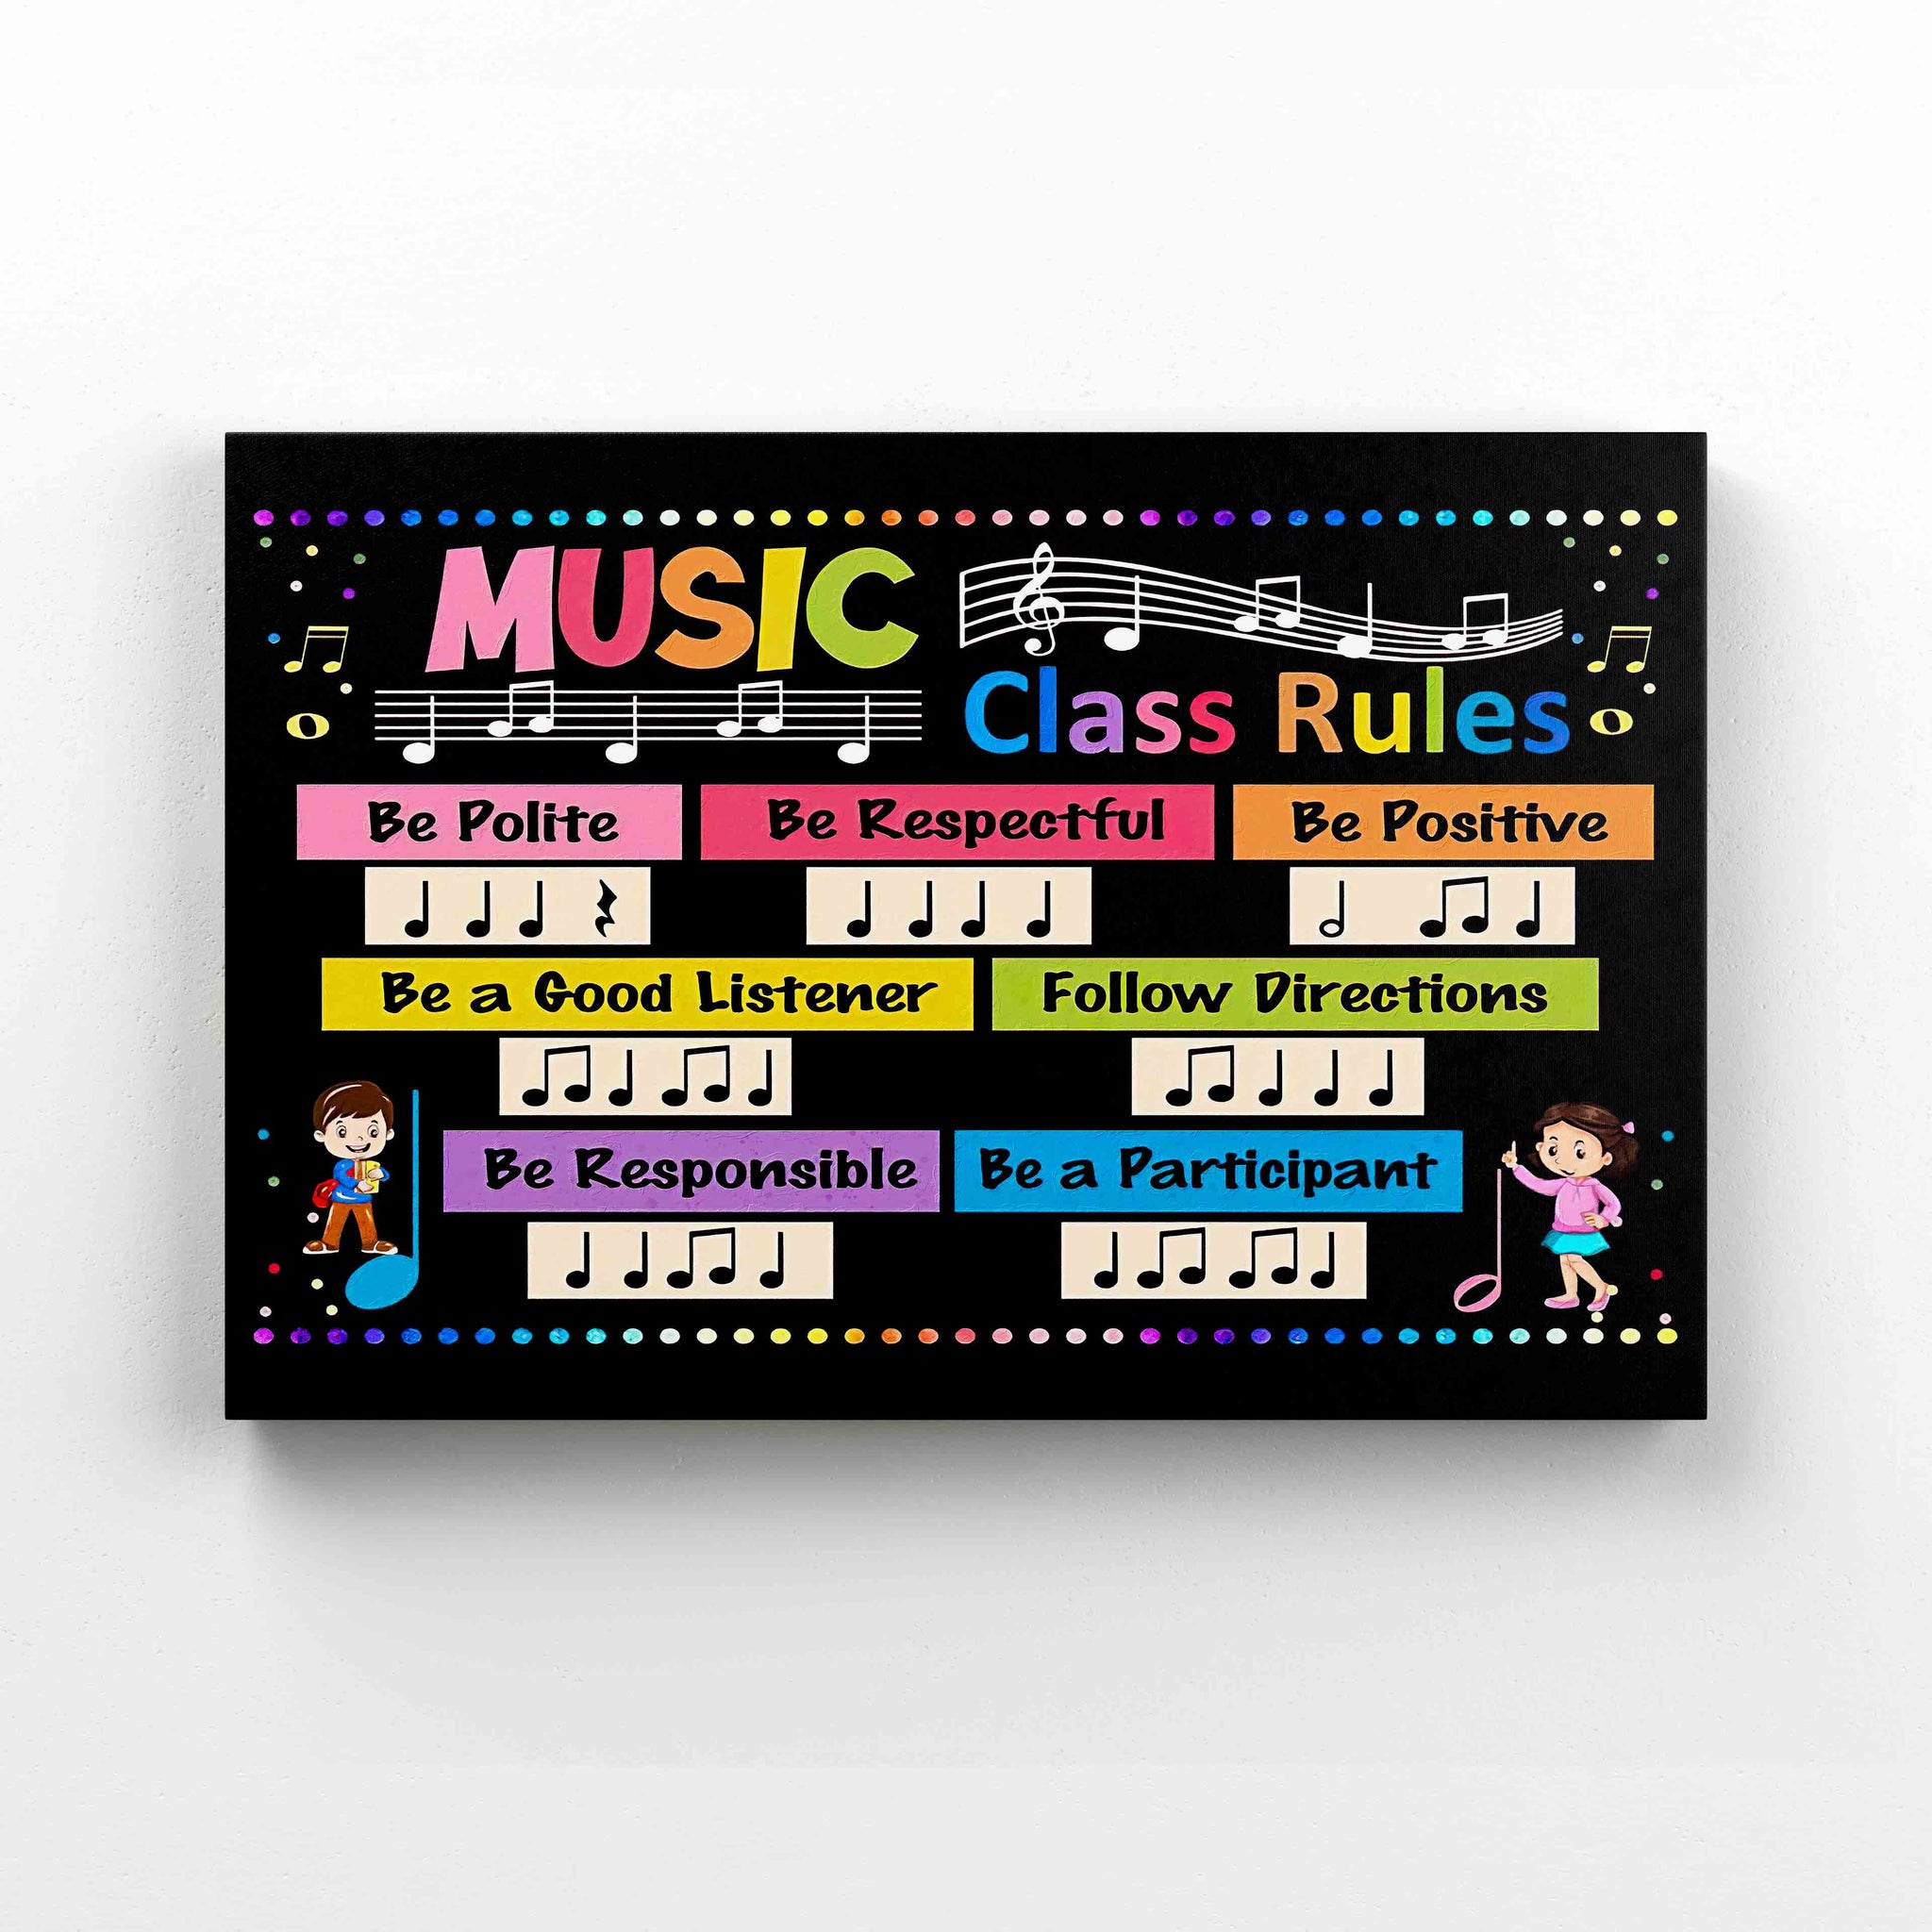 Music Class Rules Canvas, Music Canvas, Classroom Canvas, Canvas Wall Art, Canvas Prints, Gift Canvas